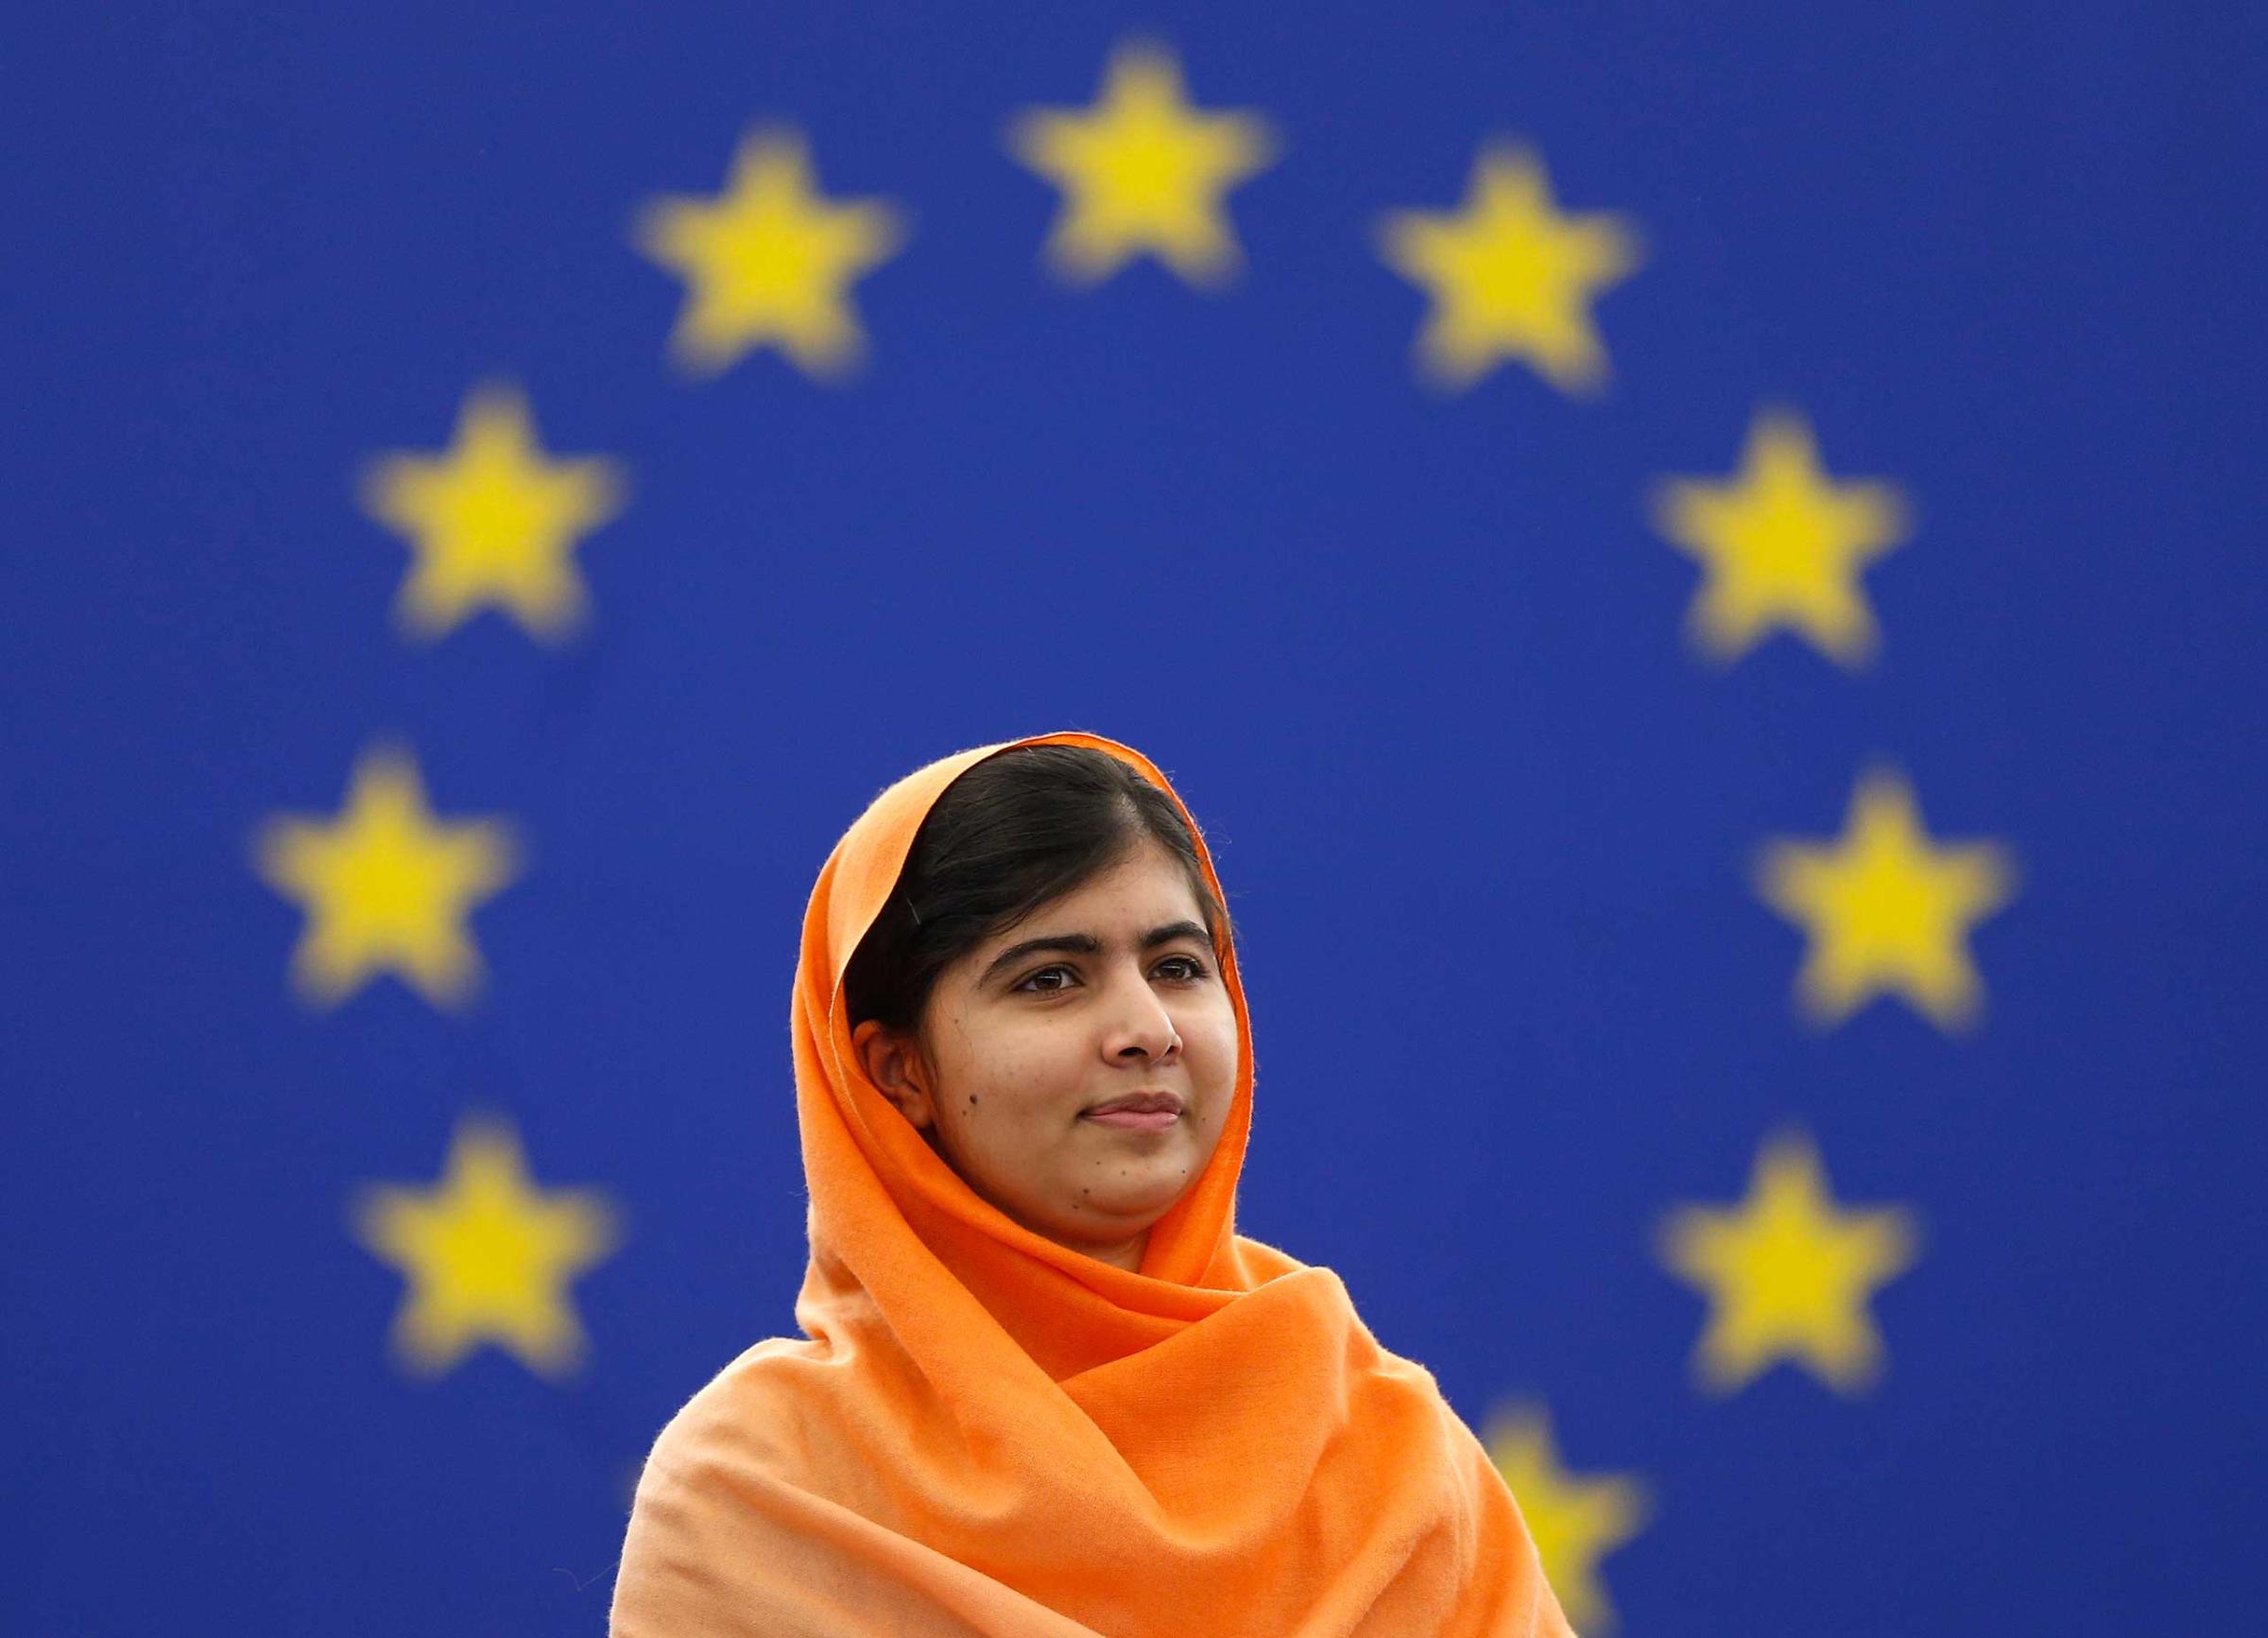 Pakistani teenage activist Malala Yousafzai, who was shot in the head by the Taliban for campaigning for girls' education, attends an award ceremony to receive her 2013 Sakharov Prize in Strasbourg